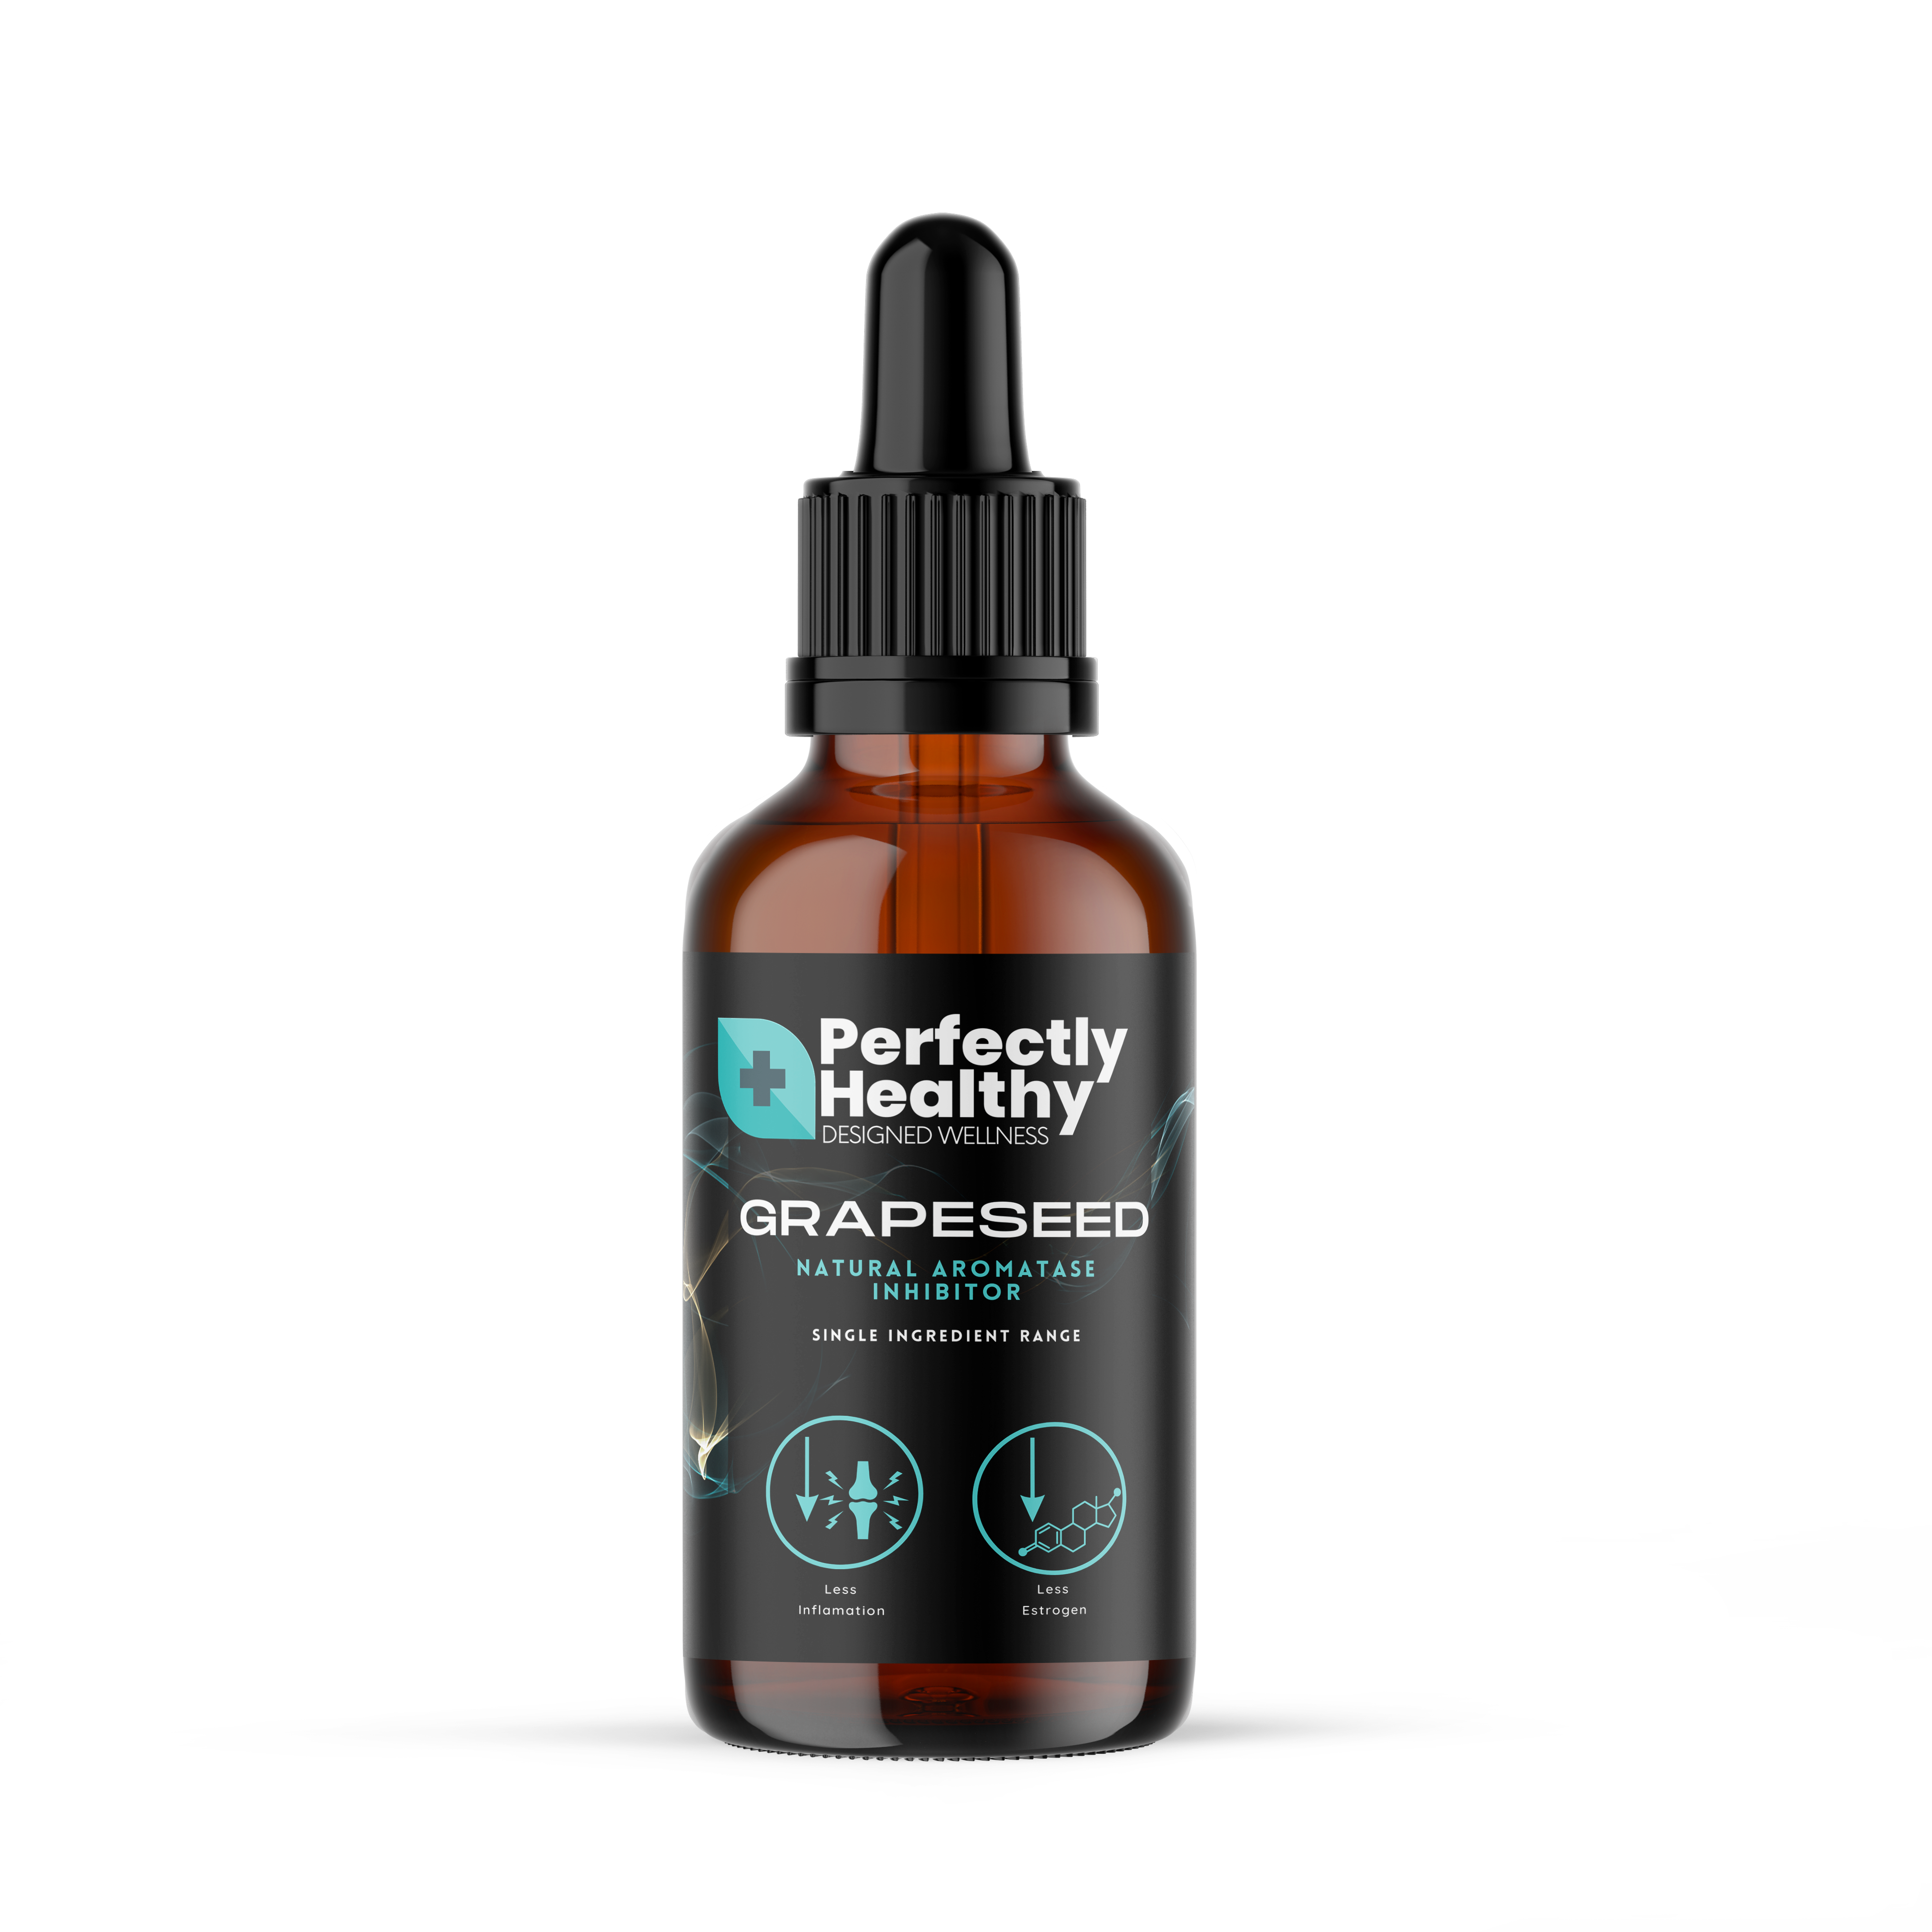 Grapeseed extract - A natural aromatase inhibitor